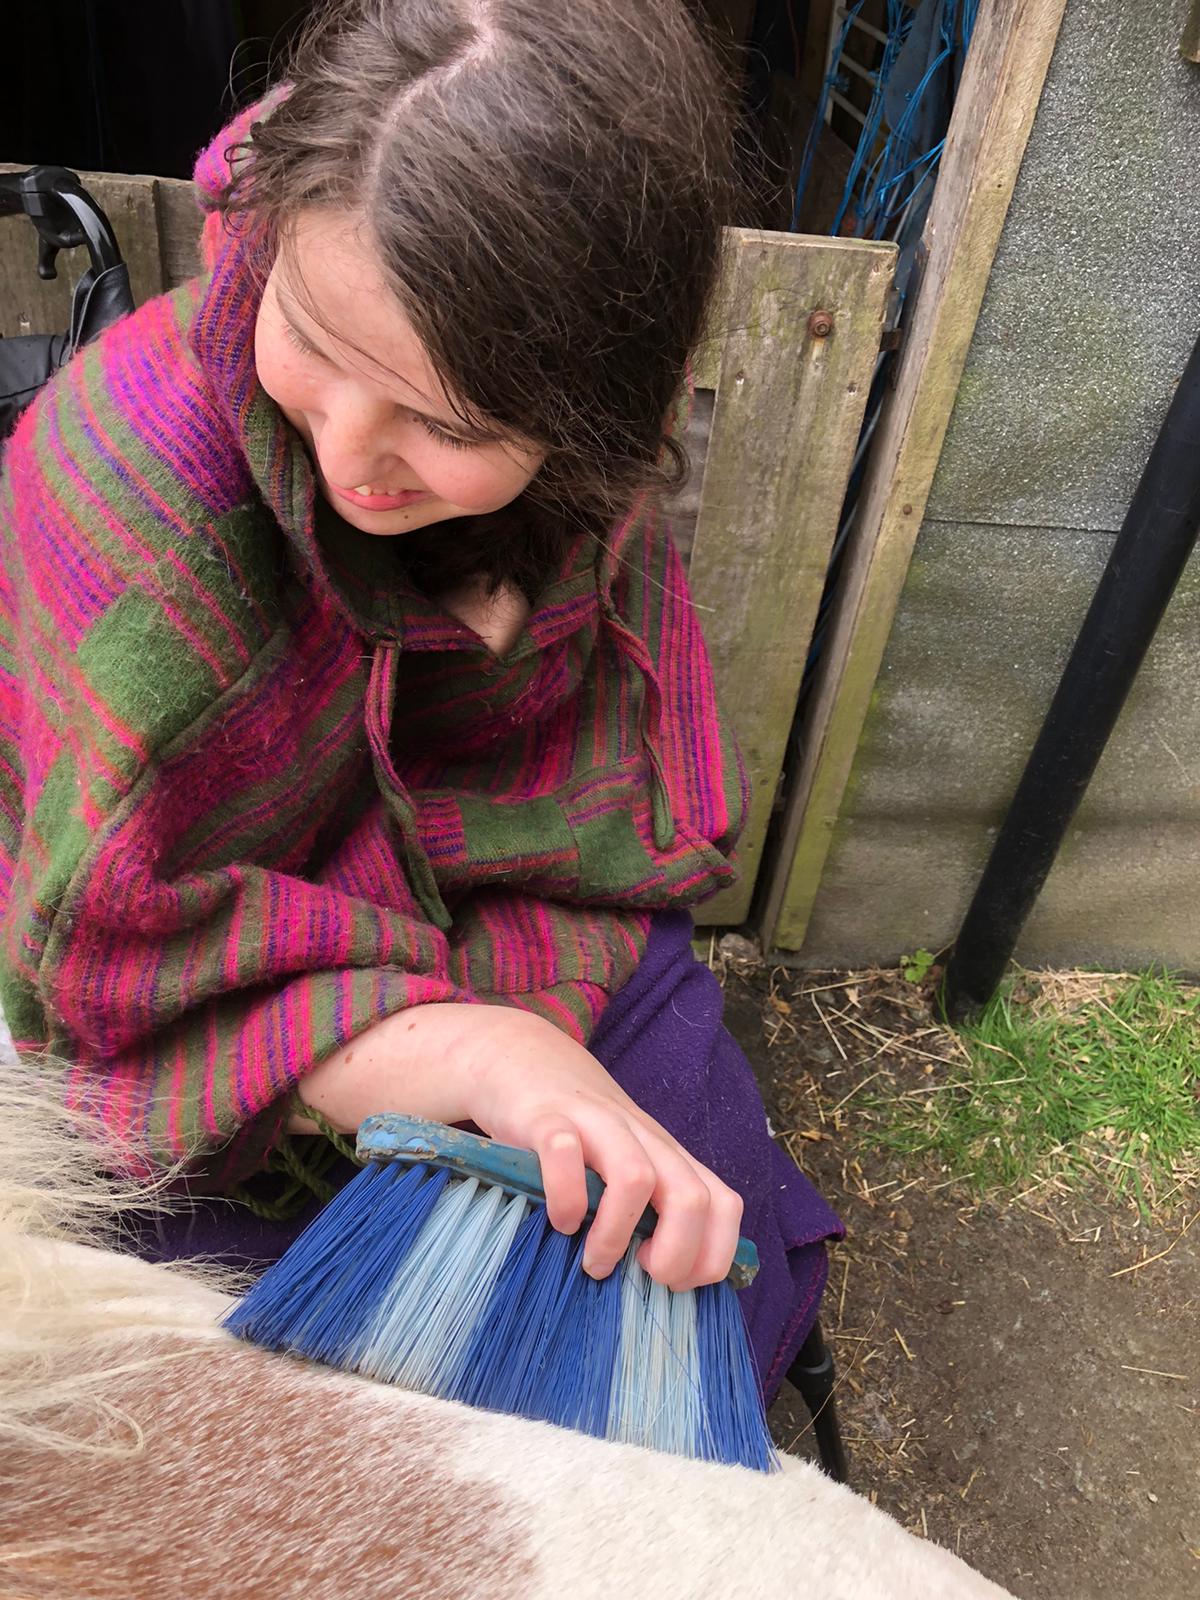 Jamie recently met one of her goals to brush a pony again